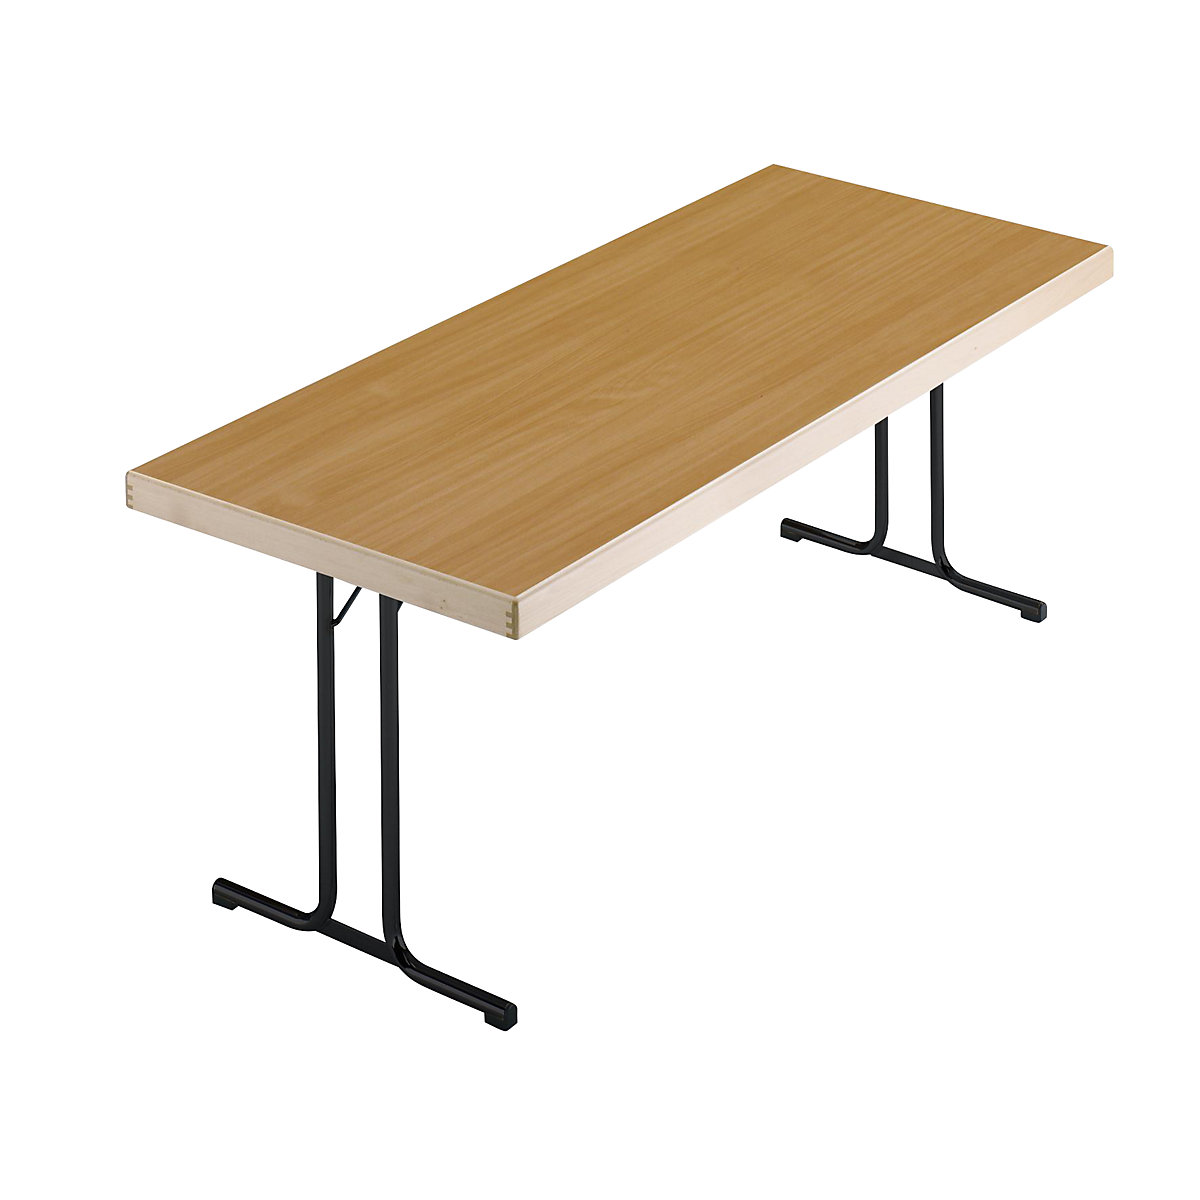 Folding table, double T-foot stand, 1500 x 800 mm, charcoal frame, beech finish tabletop-9